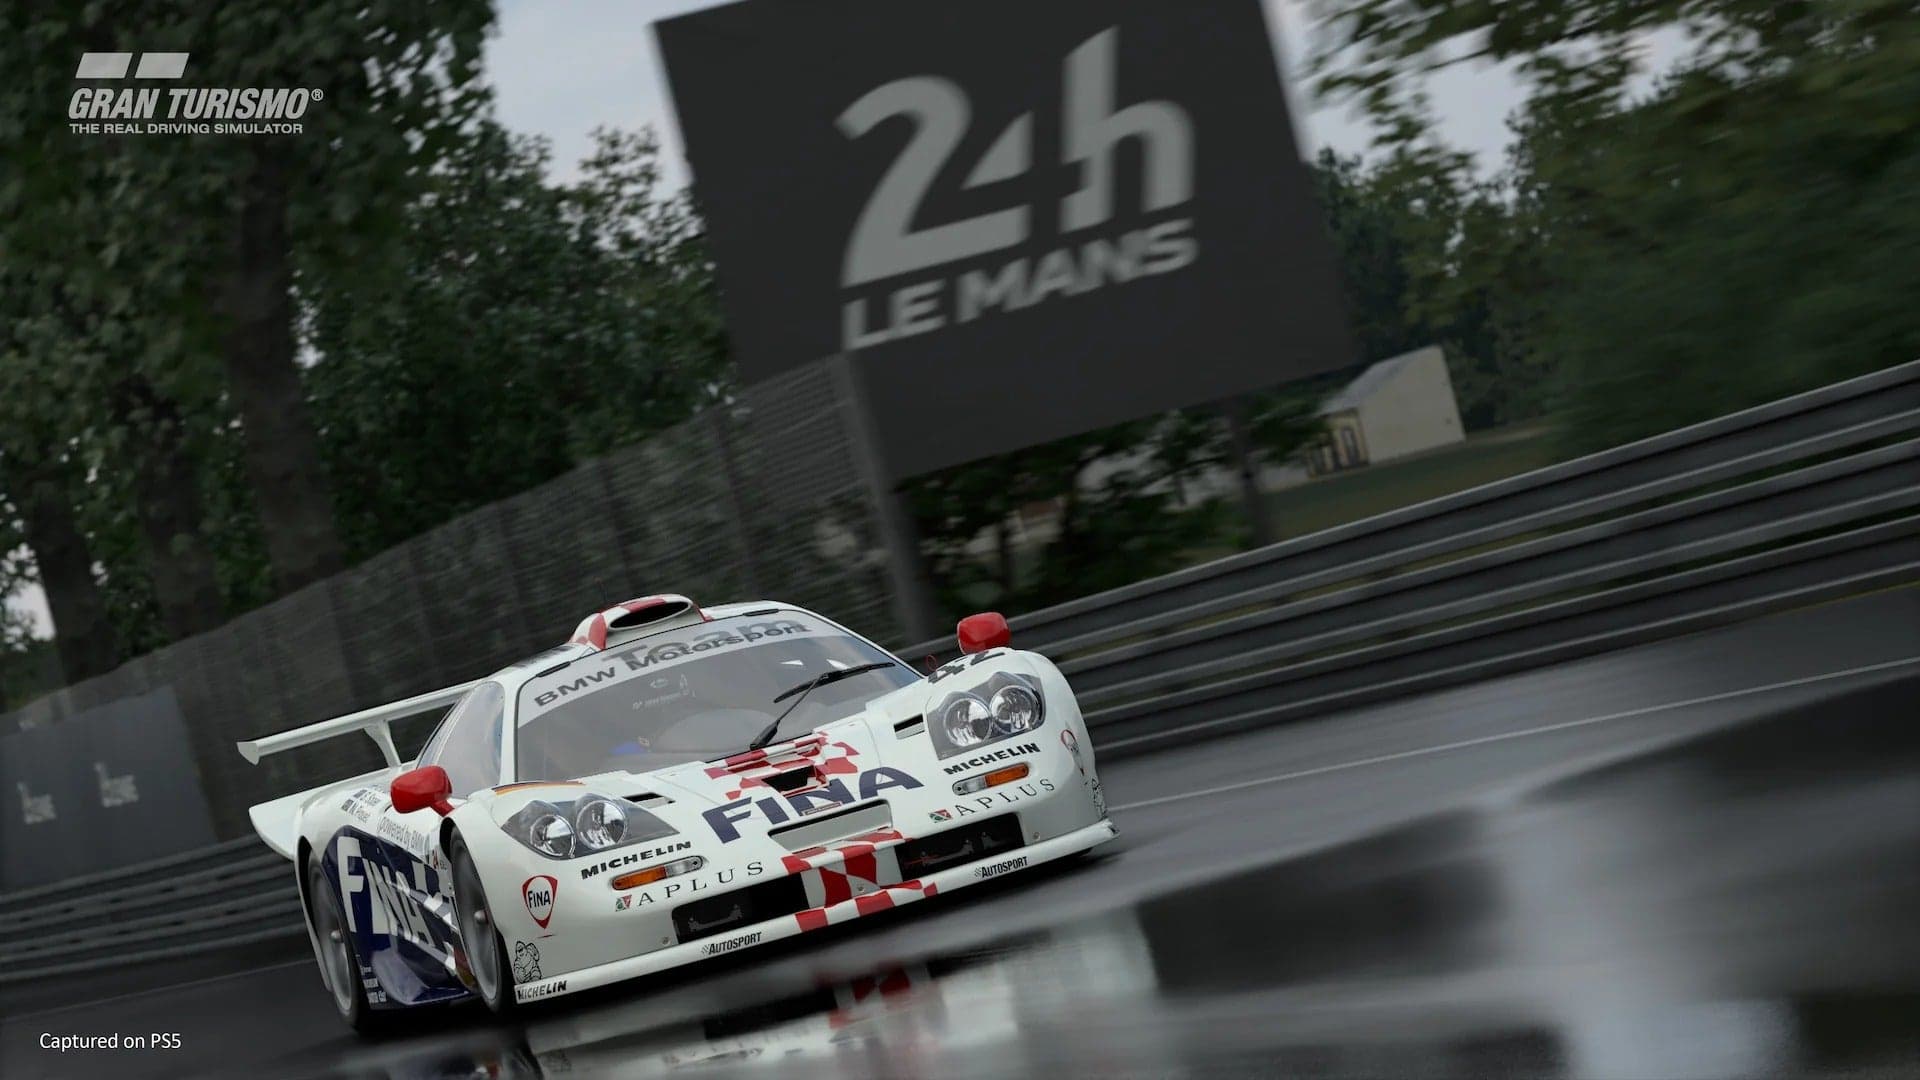 Gran Turismo 7: Here Are the Reduced Race Payouts in the New Update